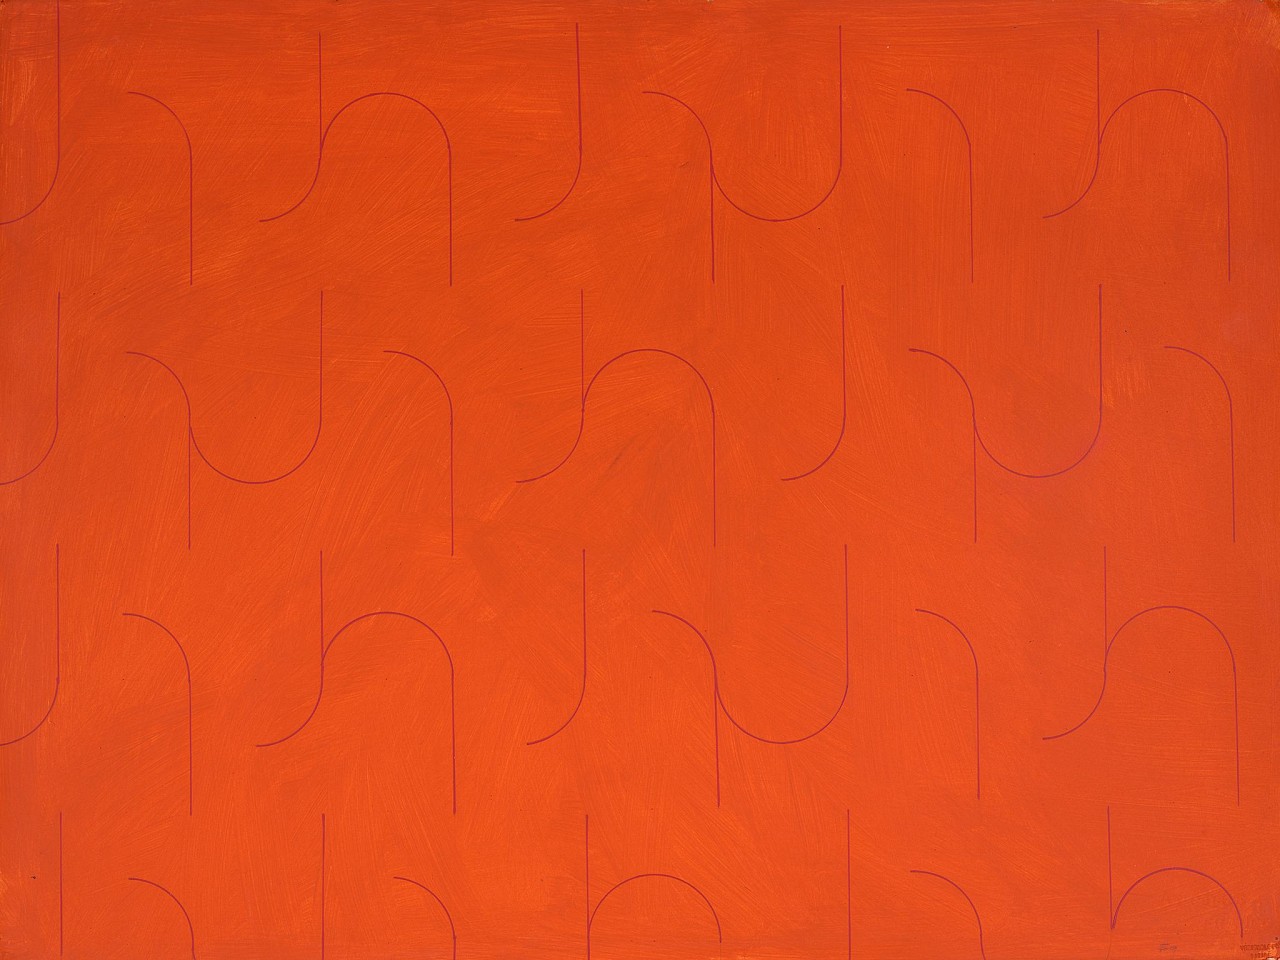 Perle Fine, Untitled (Drawing #9) | SOLD, c. 1973
Acrylic on Arches paper, 22 1/2 x 30 in. (57.1 x 76.2 cm)
© A.E. Artworks LLC
FIN-00095